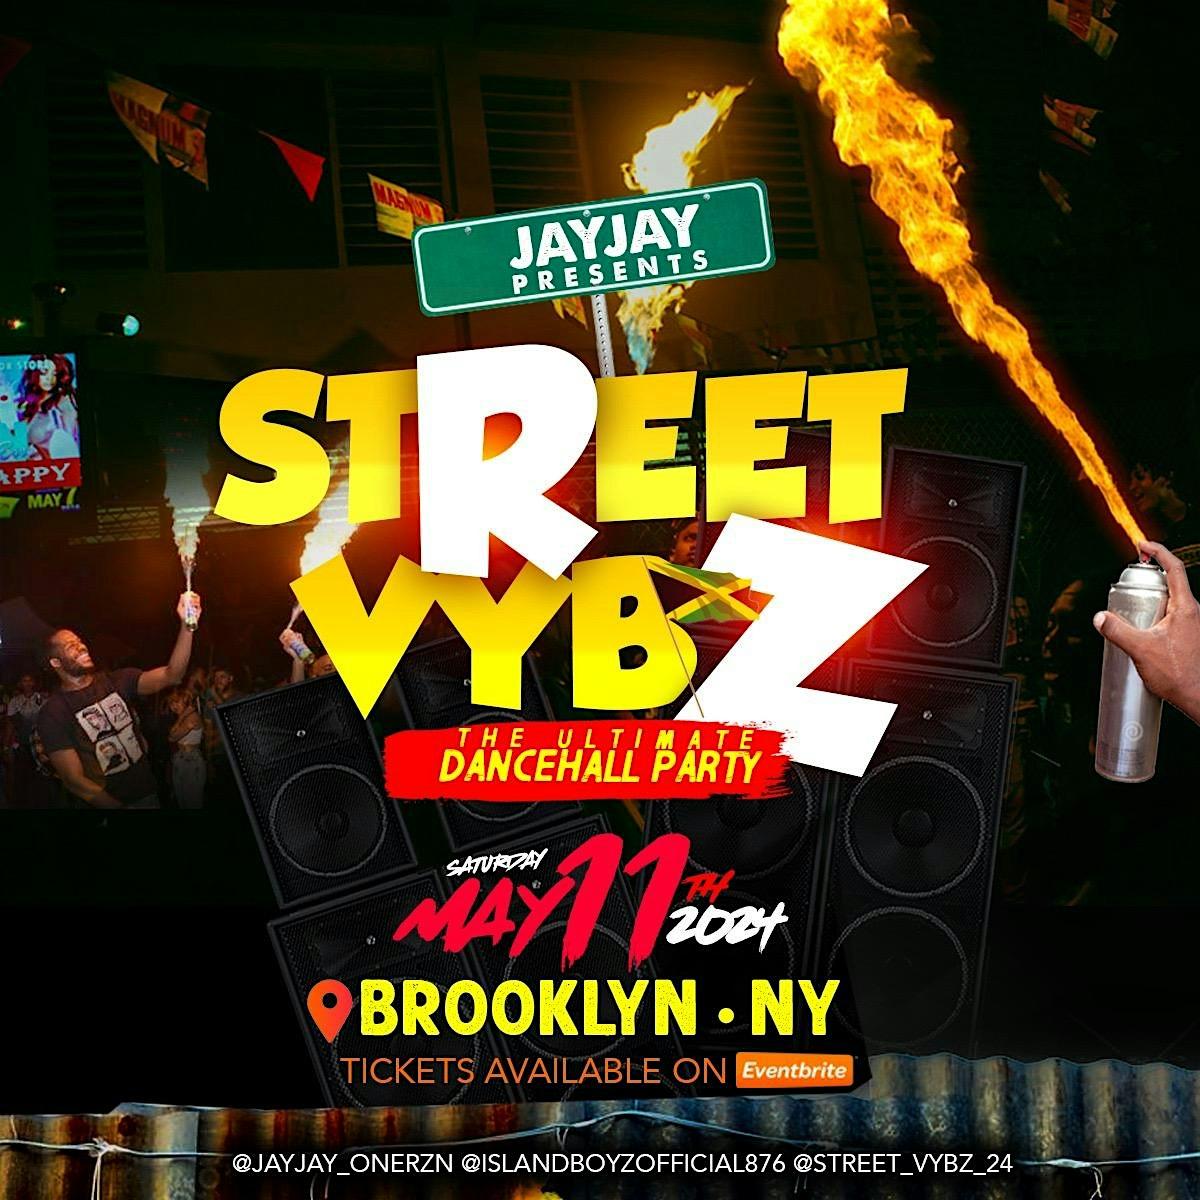 Street Vybz - Dancehall Party flyer or graphic.